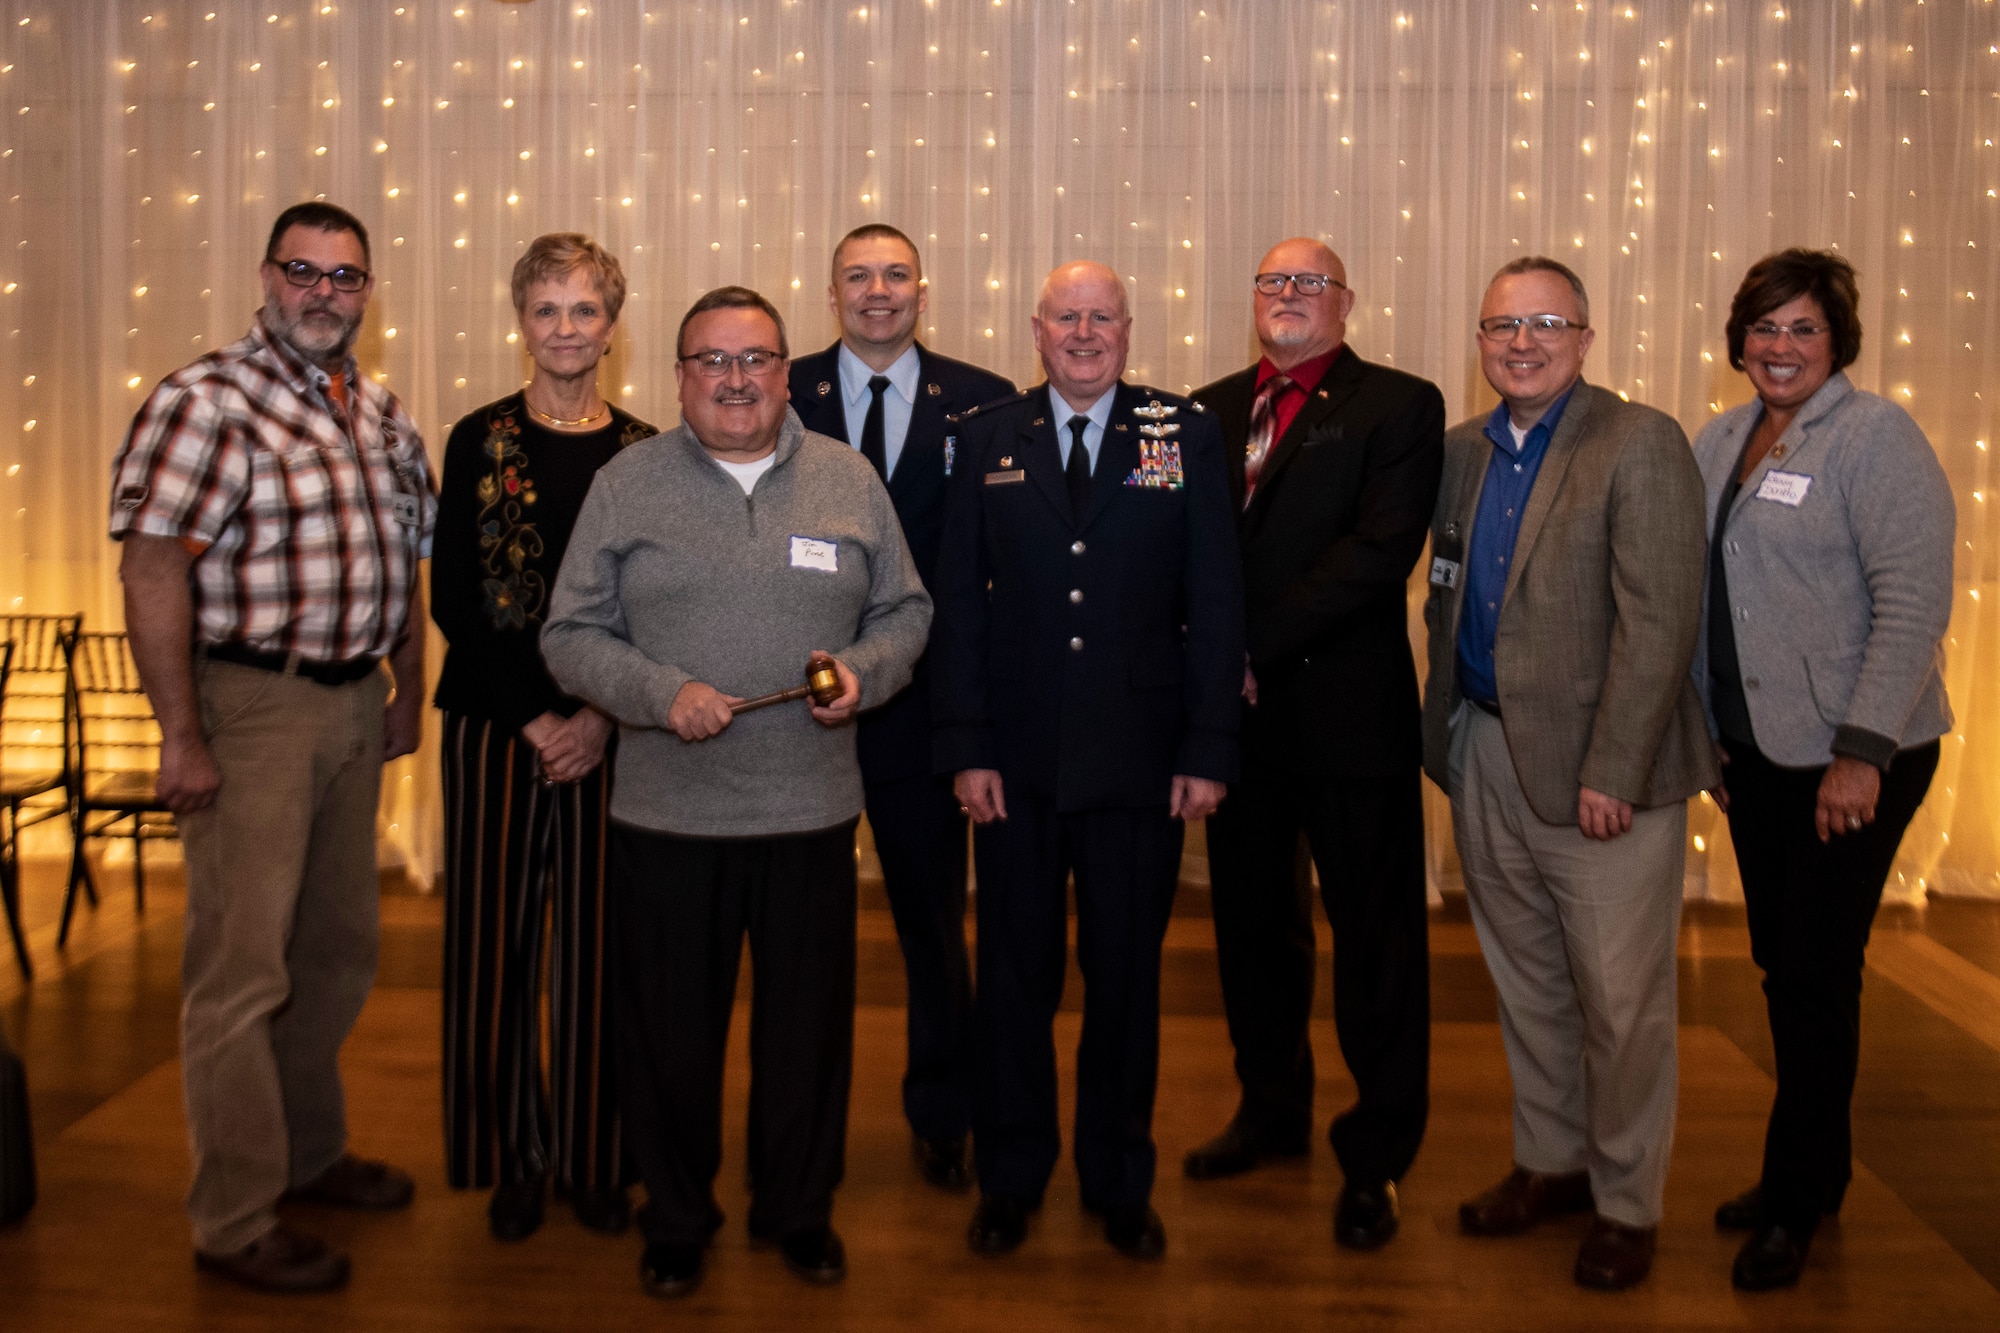 Newly elected Grissom Community Council officers pose for a photo with Grissom ARB leadership at the annual State of the Base event on 7 Feb, 2022 in Kokomo, IN. The council is a civilian non-profit organization whose goal is to support the men and women at Grissom. (U.S. Air Force photo by Tech Sgt. Josh Weaver)